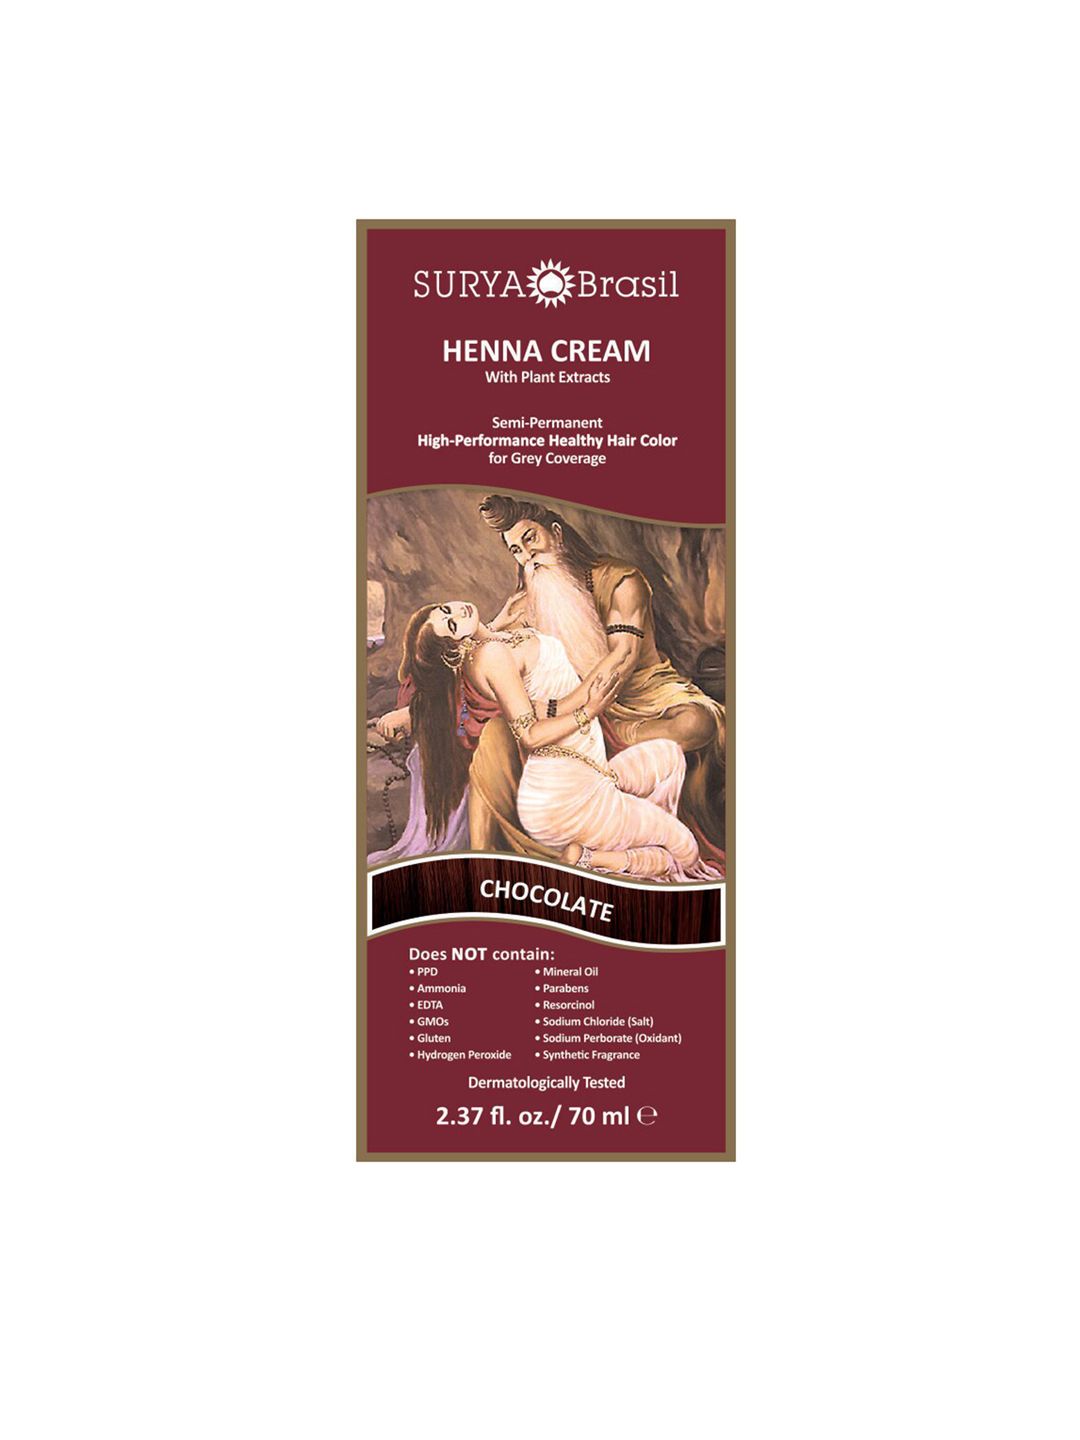 SURYA Brasil Henna Cream Semi-Permanent Hair Color with Plant Extracts 70ml - Chocolate Price in India